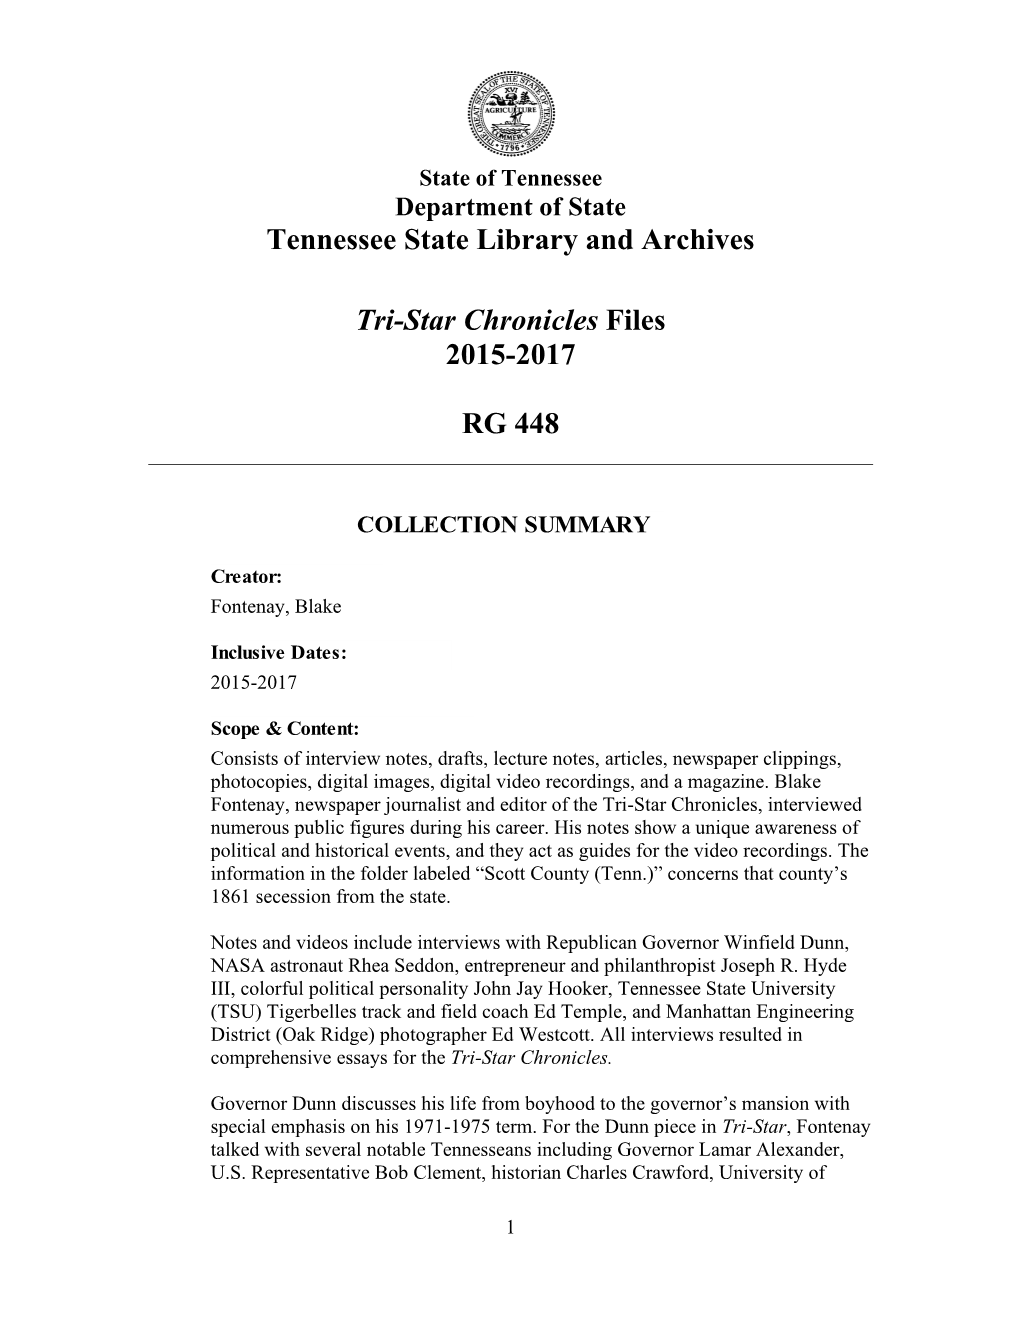 Tennessee State Library and Archives Tri-Star Chronicles Files 2015